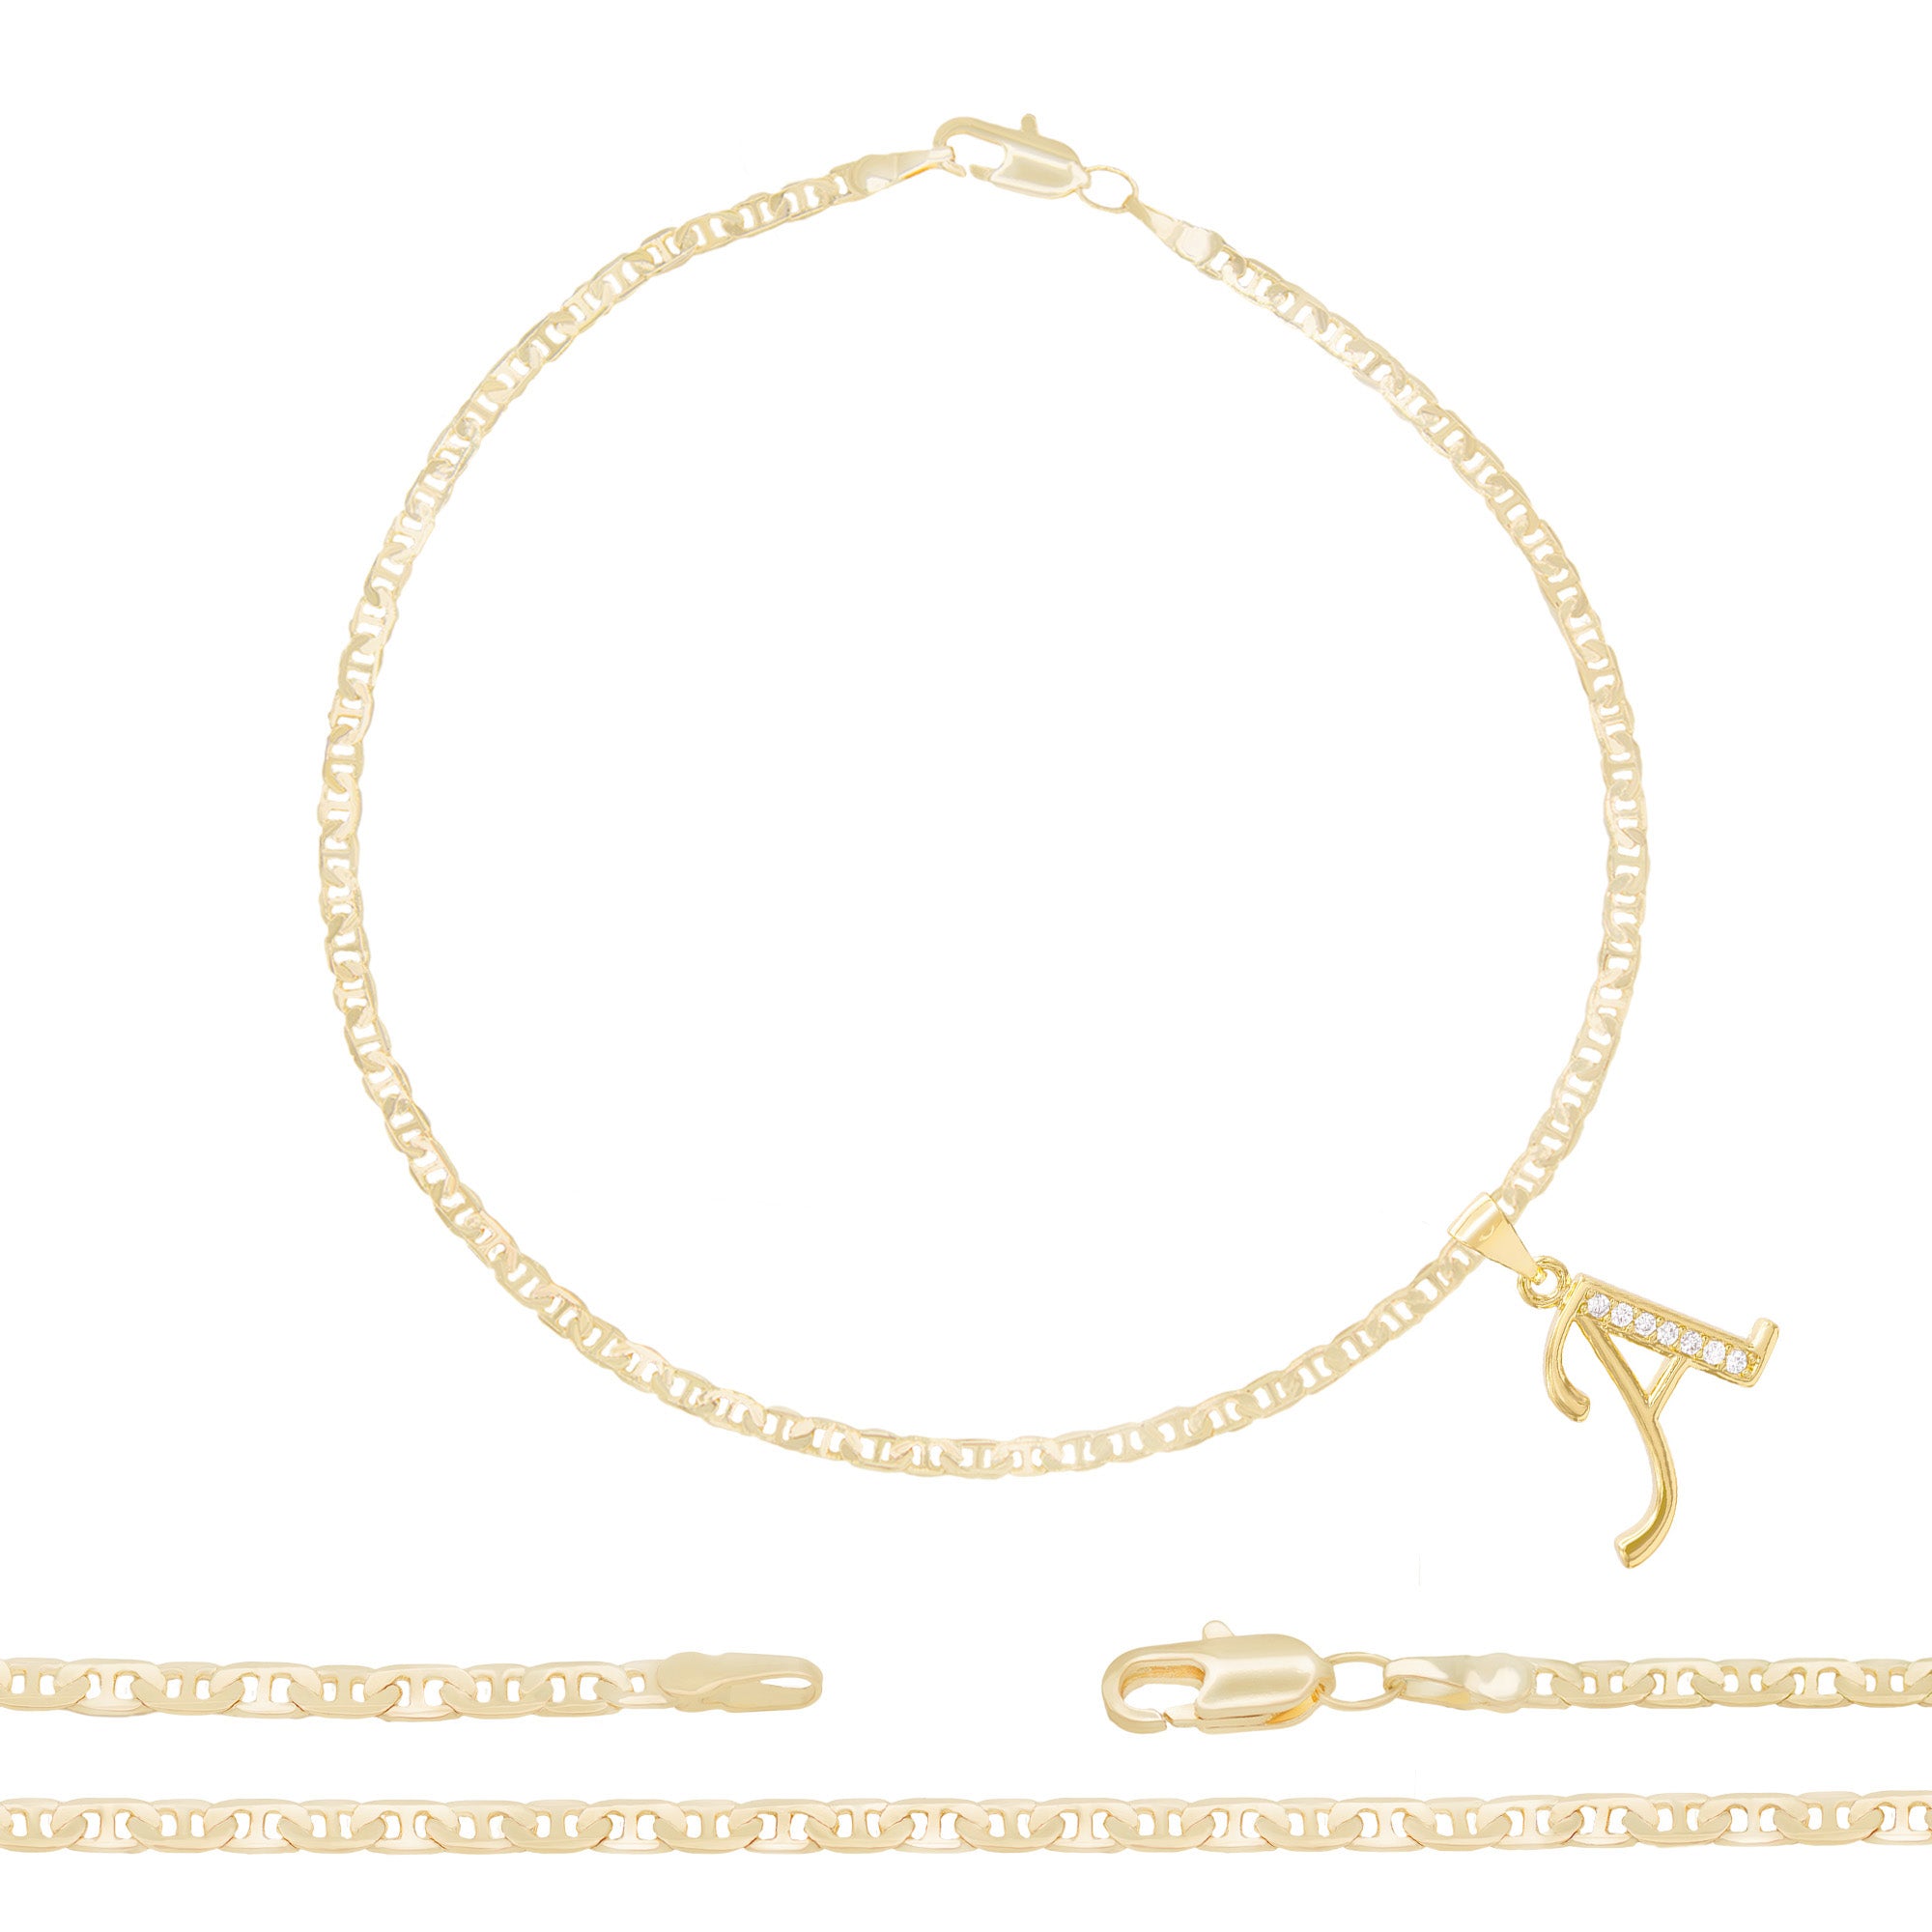 Monogram Bracelet or Anklet With Double Chain (Order Any Initials) - 10K,  14K, 18K Solid Gold or Sterling Silver w/Yellow, Rose, White Gold